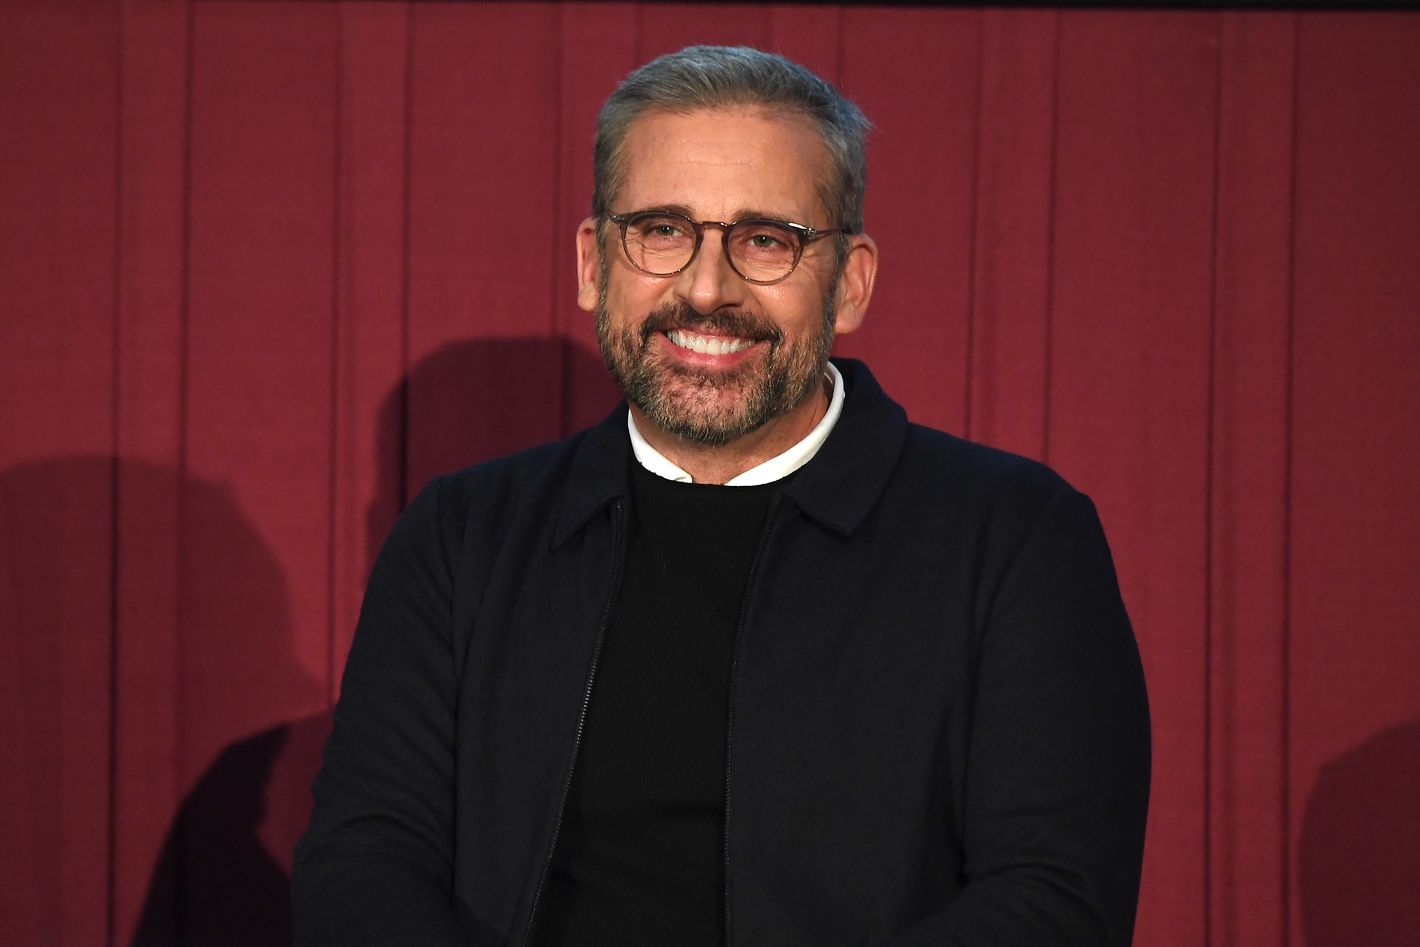 Steve Carell and Tina Fey Get a Second Date